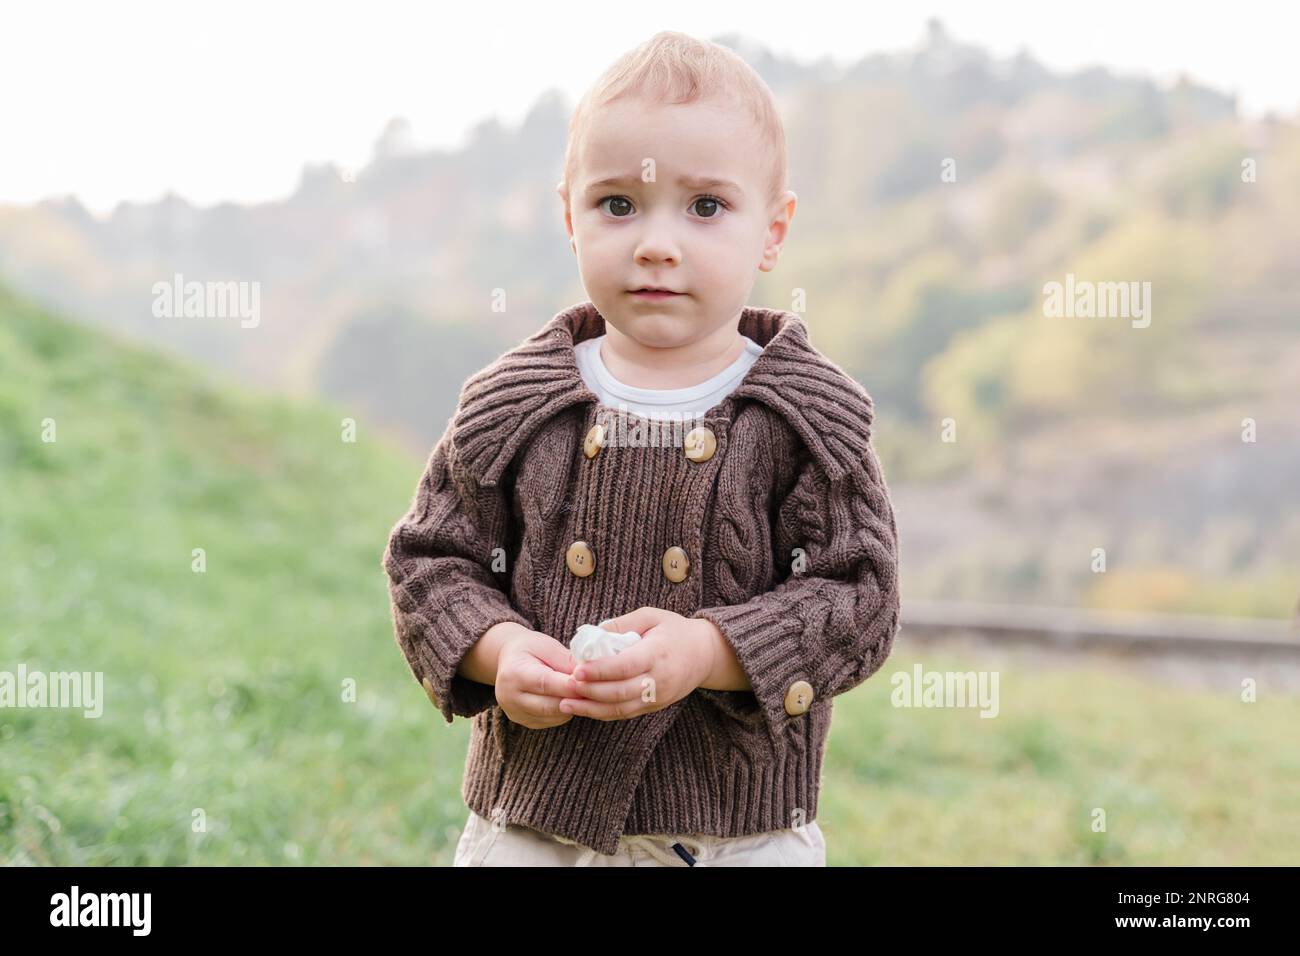 A brown-eyed Caucasian baby boy toddler outdoors Stock Photo